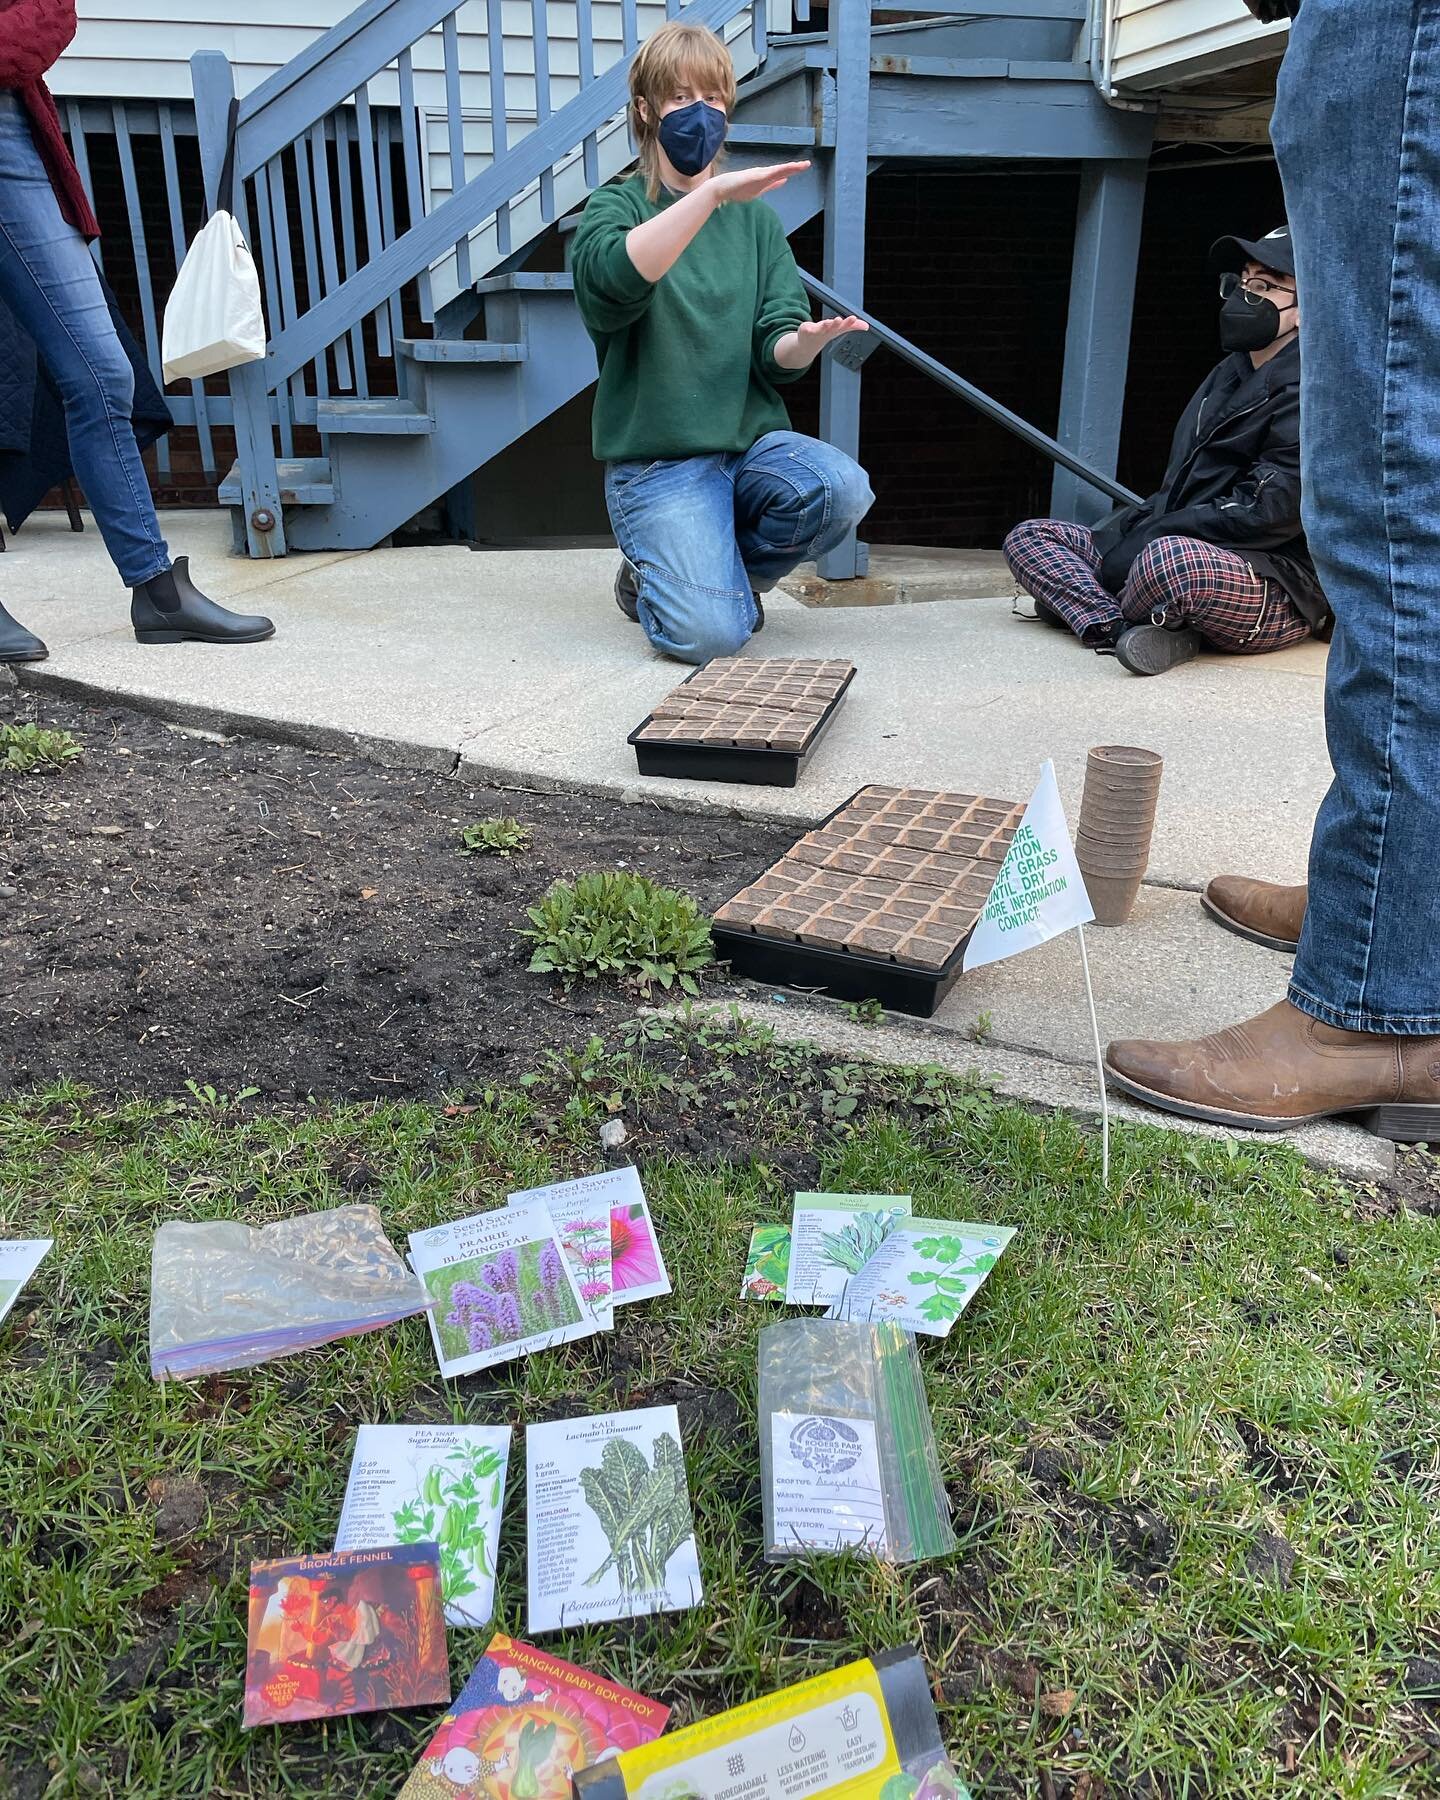 Last week, EMAN members got together for a seed starting skillshare. And some of the seeds we sowed have already begun sprouting! Can&rsquo;t wait until the weather warms up so we can meet up more frequently 🌱
#Chicago #MutualAid #SeedStarting #Skil